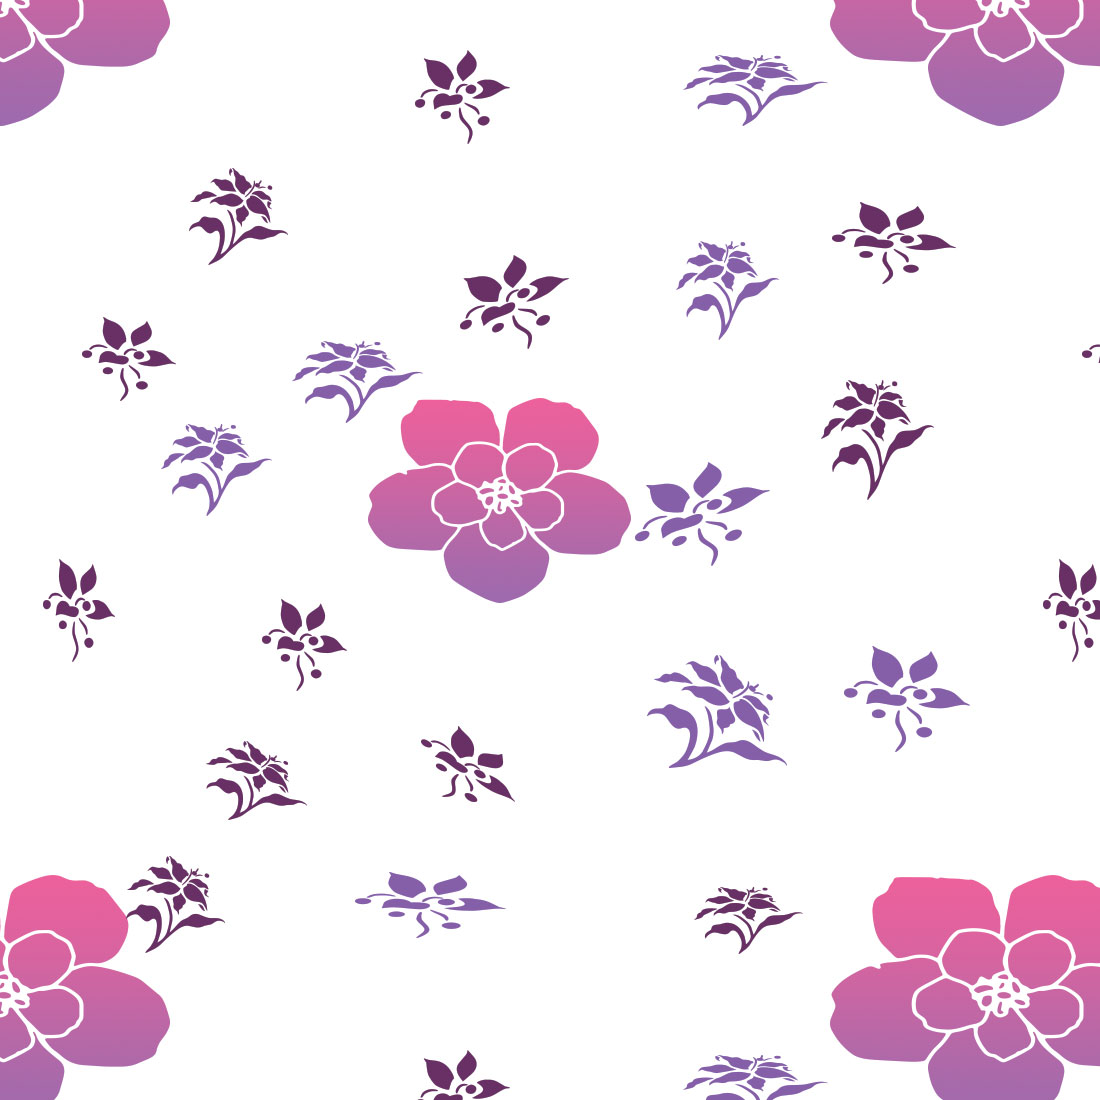 Floral Seamless Patterns cover image.